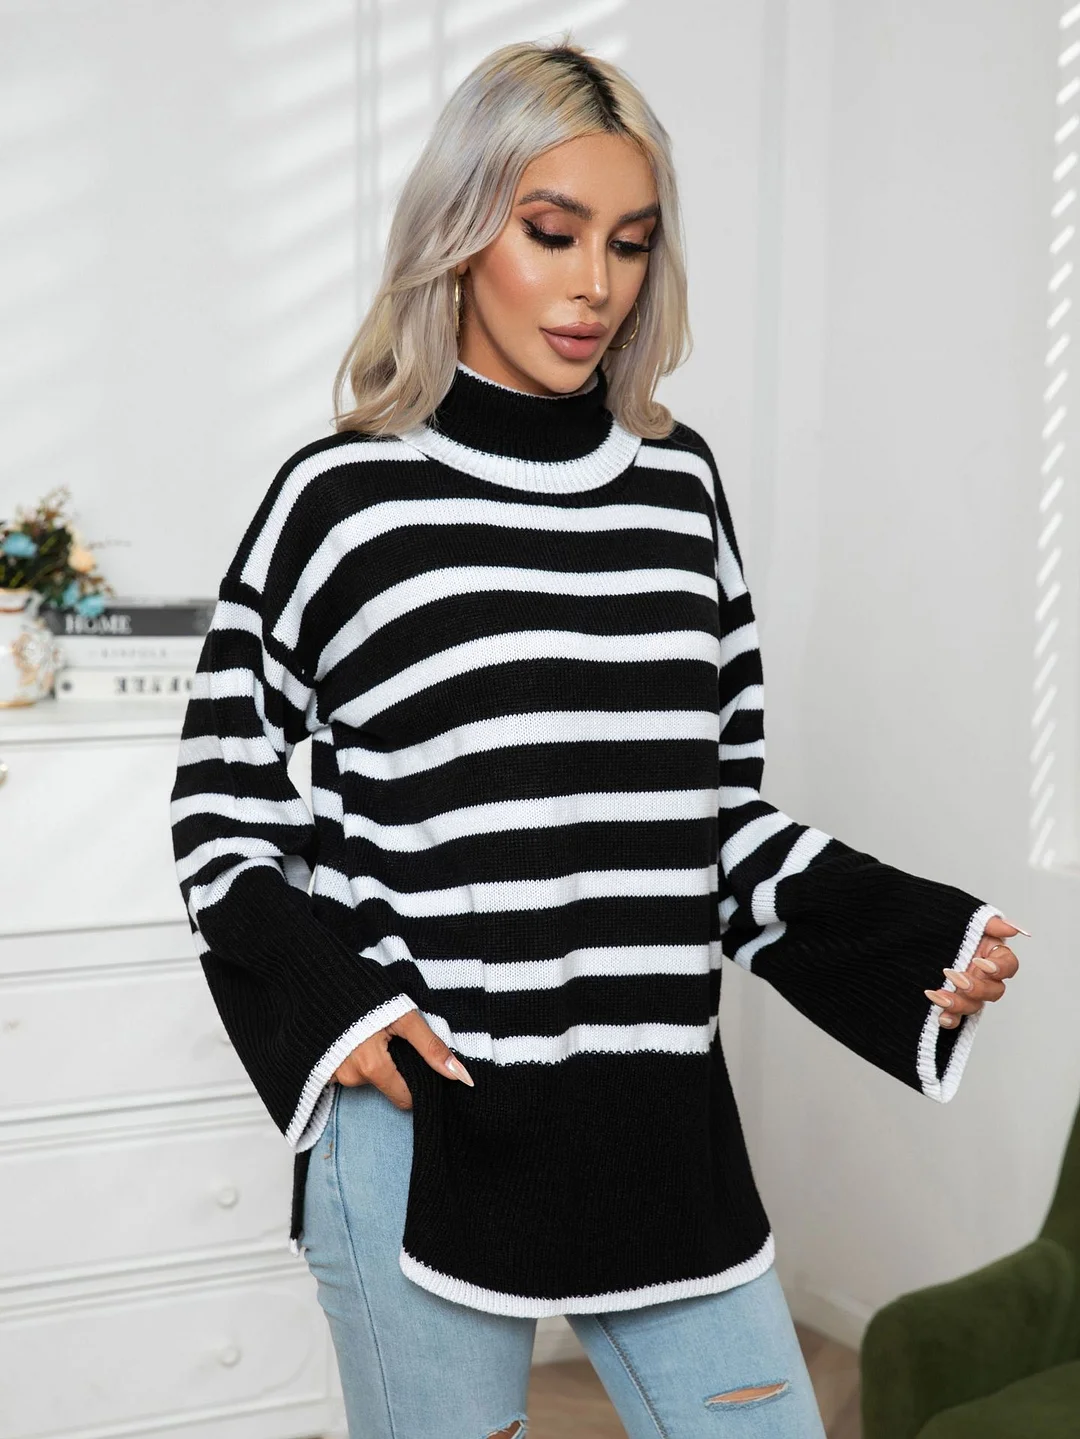 PASUXI Fall Winter Women Clothing Stripes Turtleneck Long Sleeve Oversized Sweater Casual Loose Fit Ribbed Knit Sweater Pullover